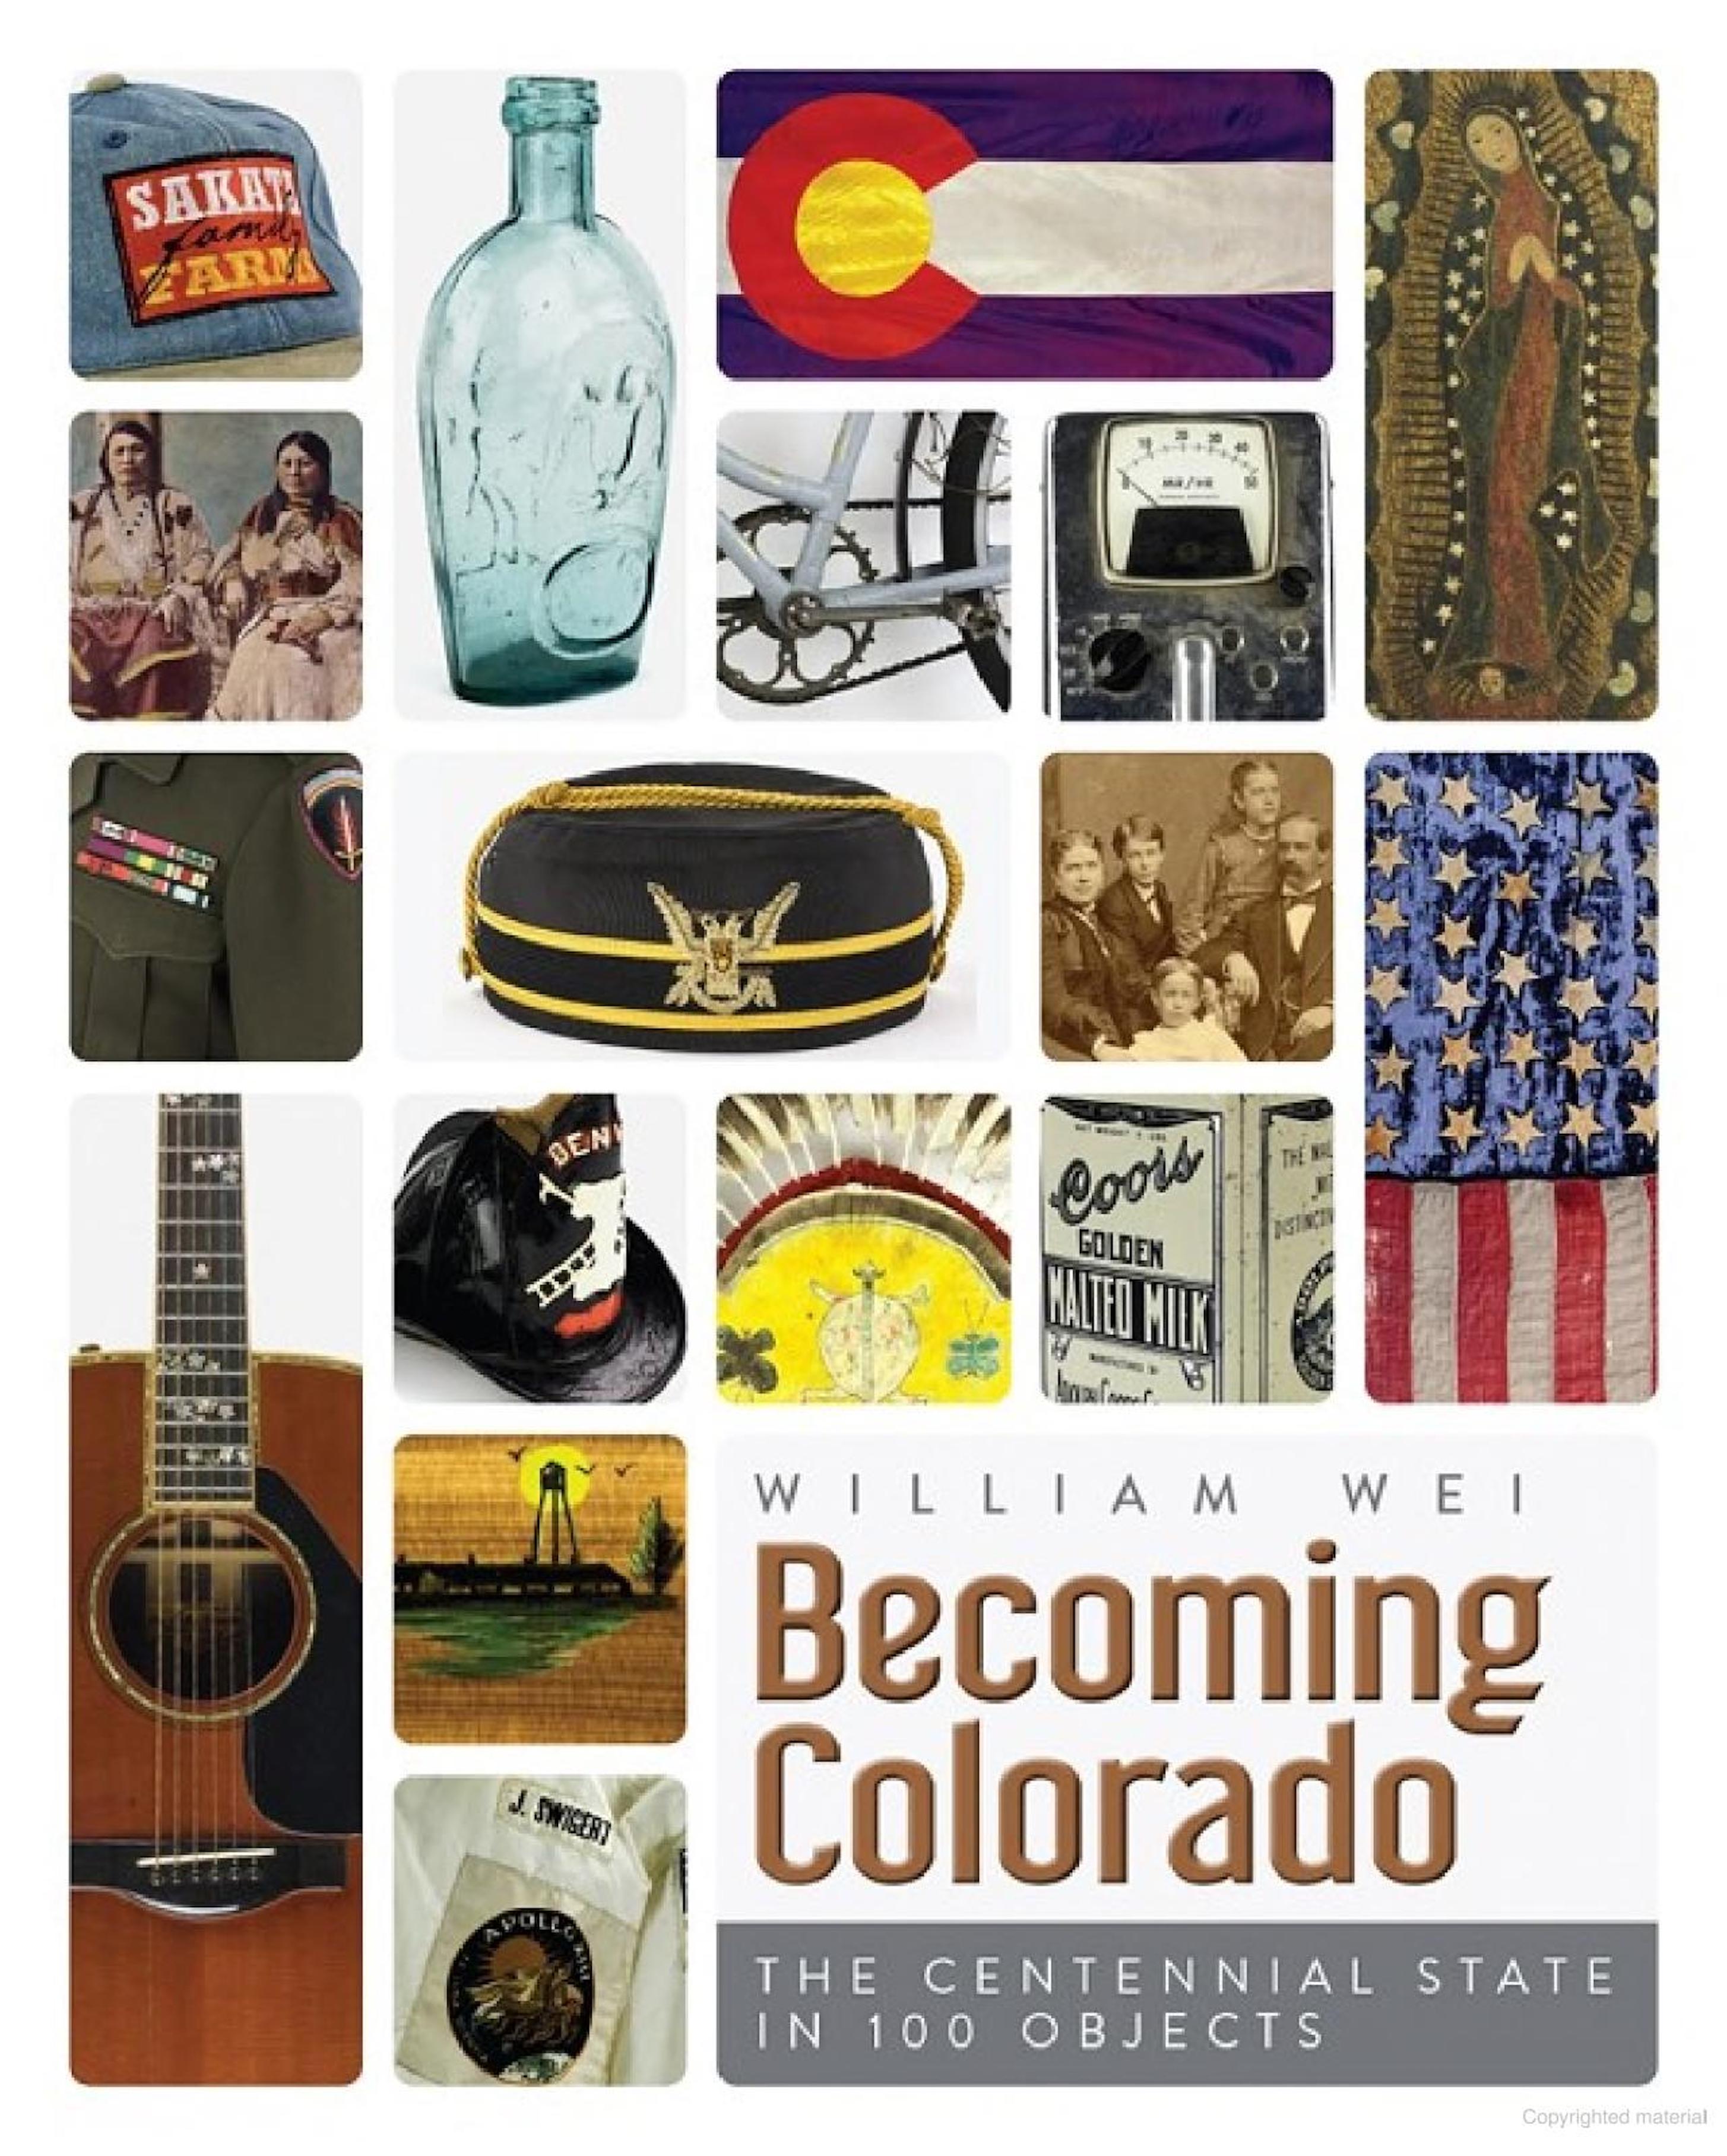 "Becoming Colorado: The Centennial State in 100 Objects" by Dr. William Wei